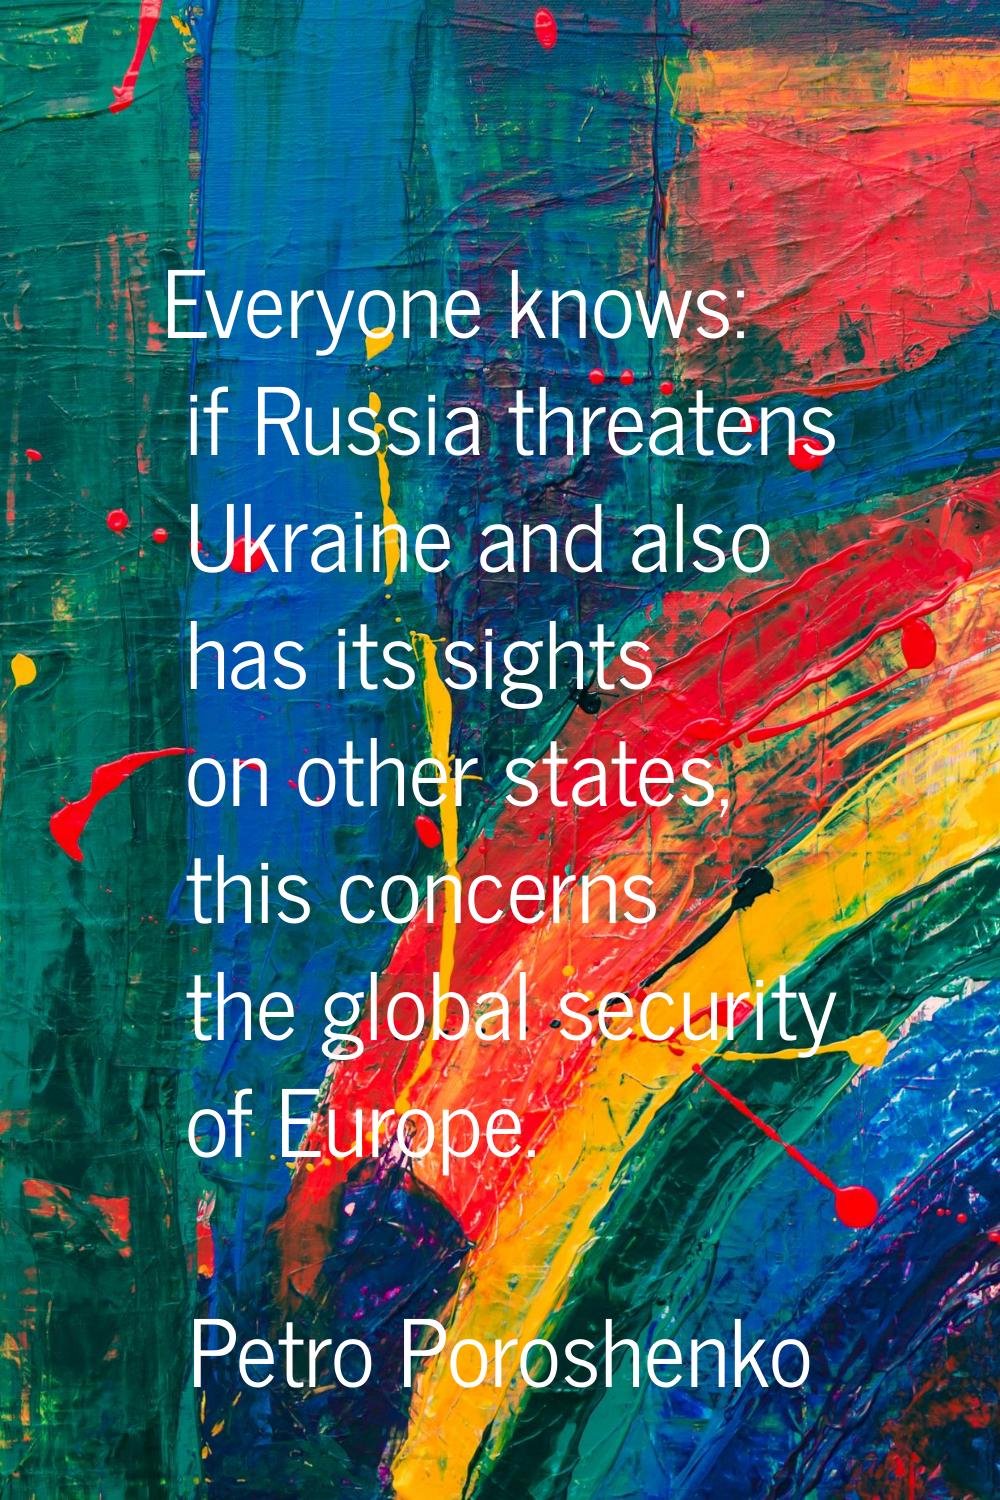 Everyone knows: if Russia threatens Ukraine and also has its sights on other states, this concerns 